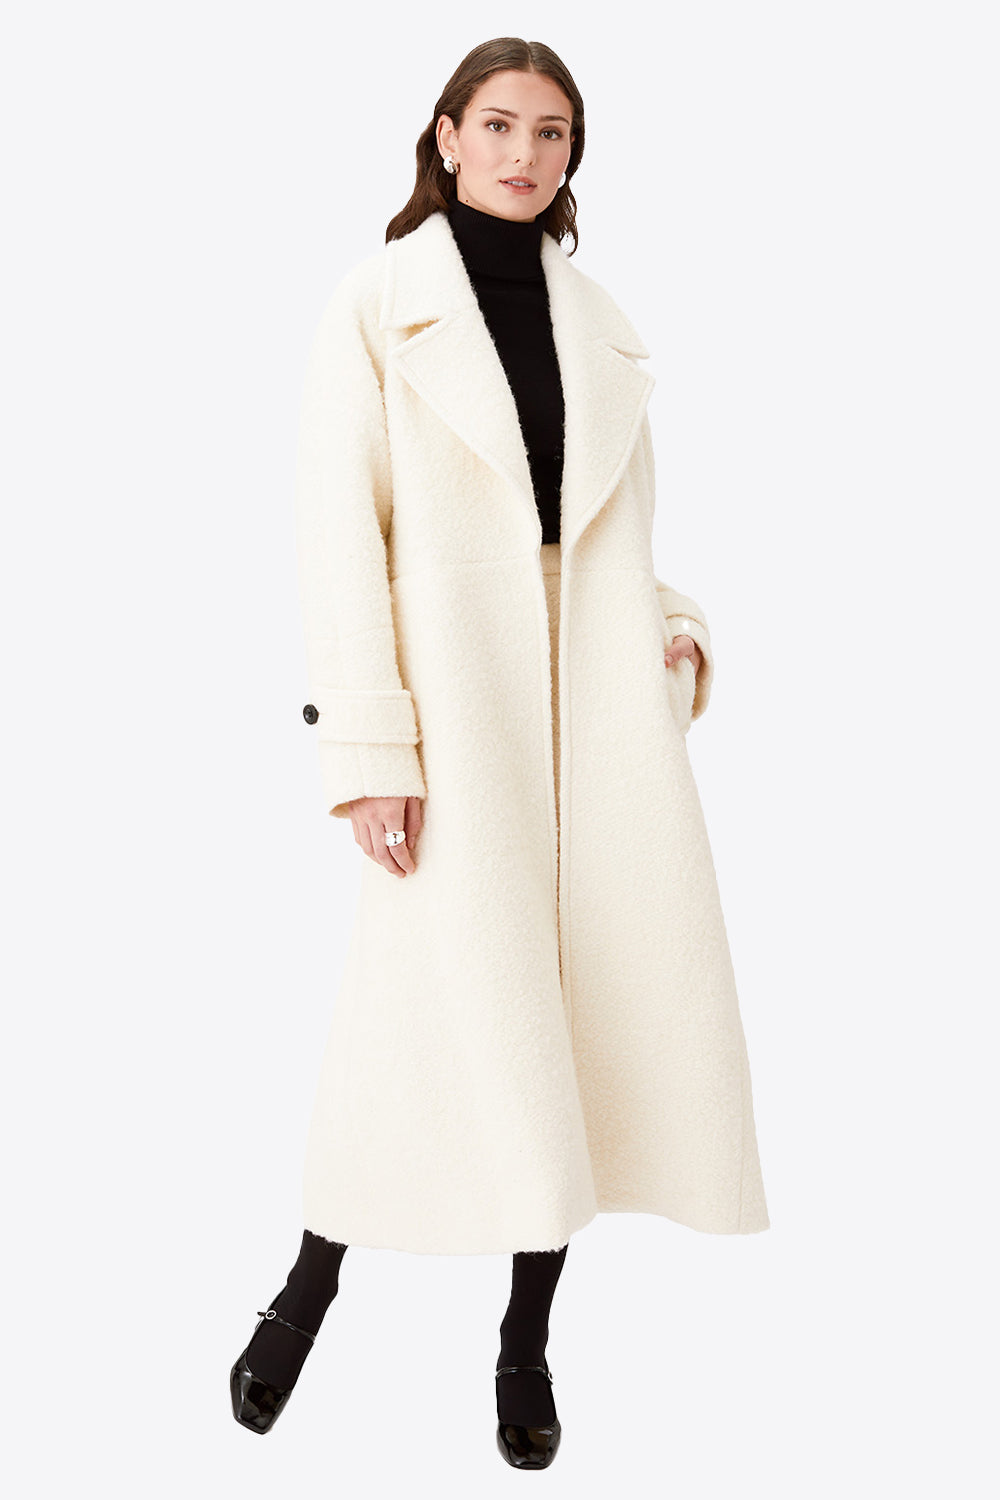 Look 4 - Brandy Boucle Trench Coat in Ivory